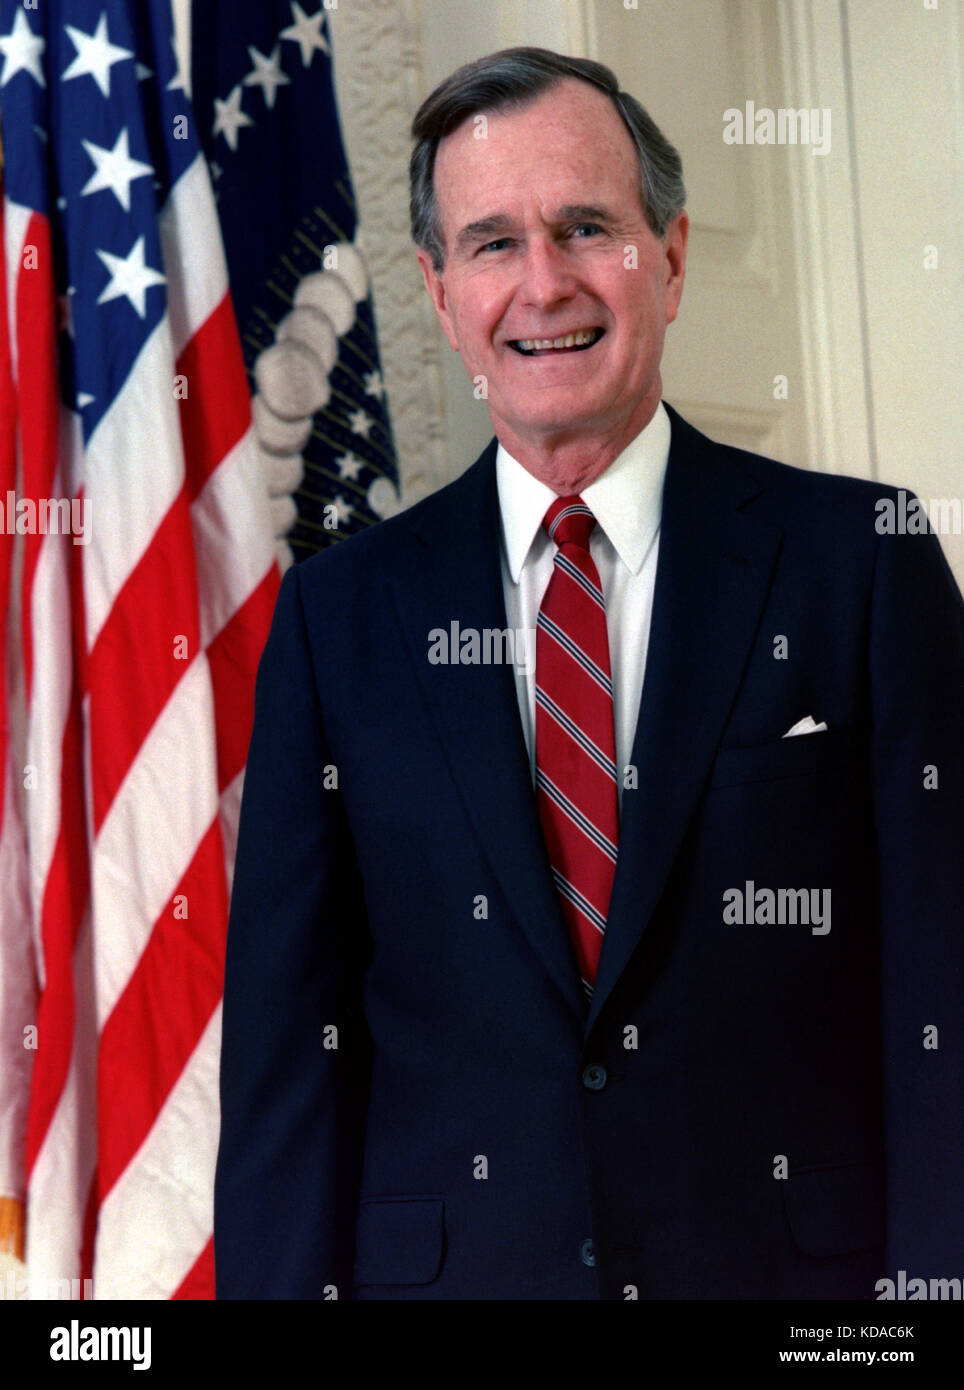 Official portrait of U.S. President George H. W. Bush at the White House 1989 in Washington, DC. Stock Photo